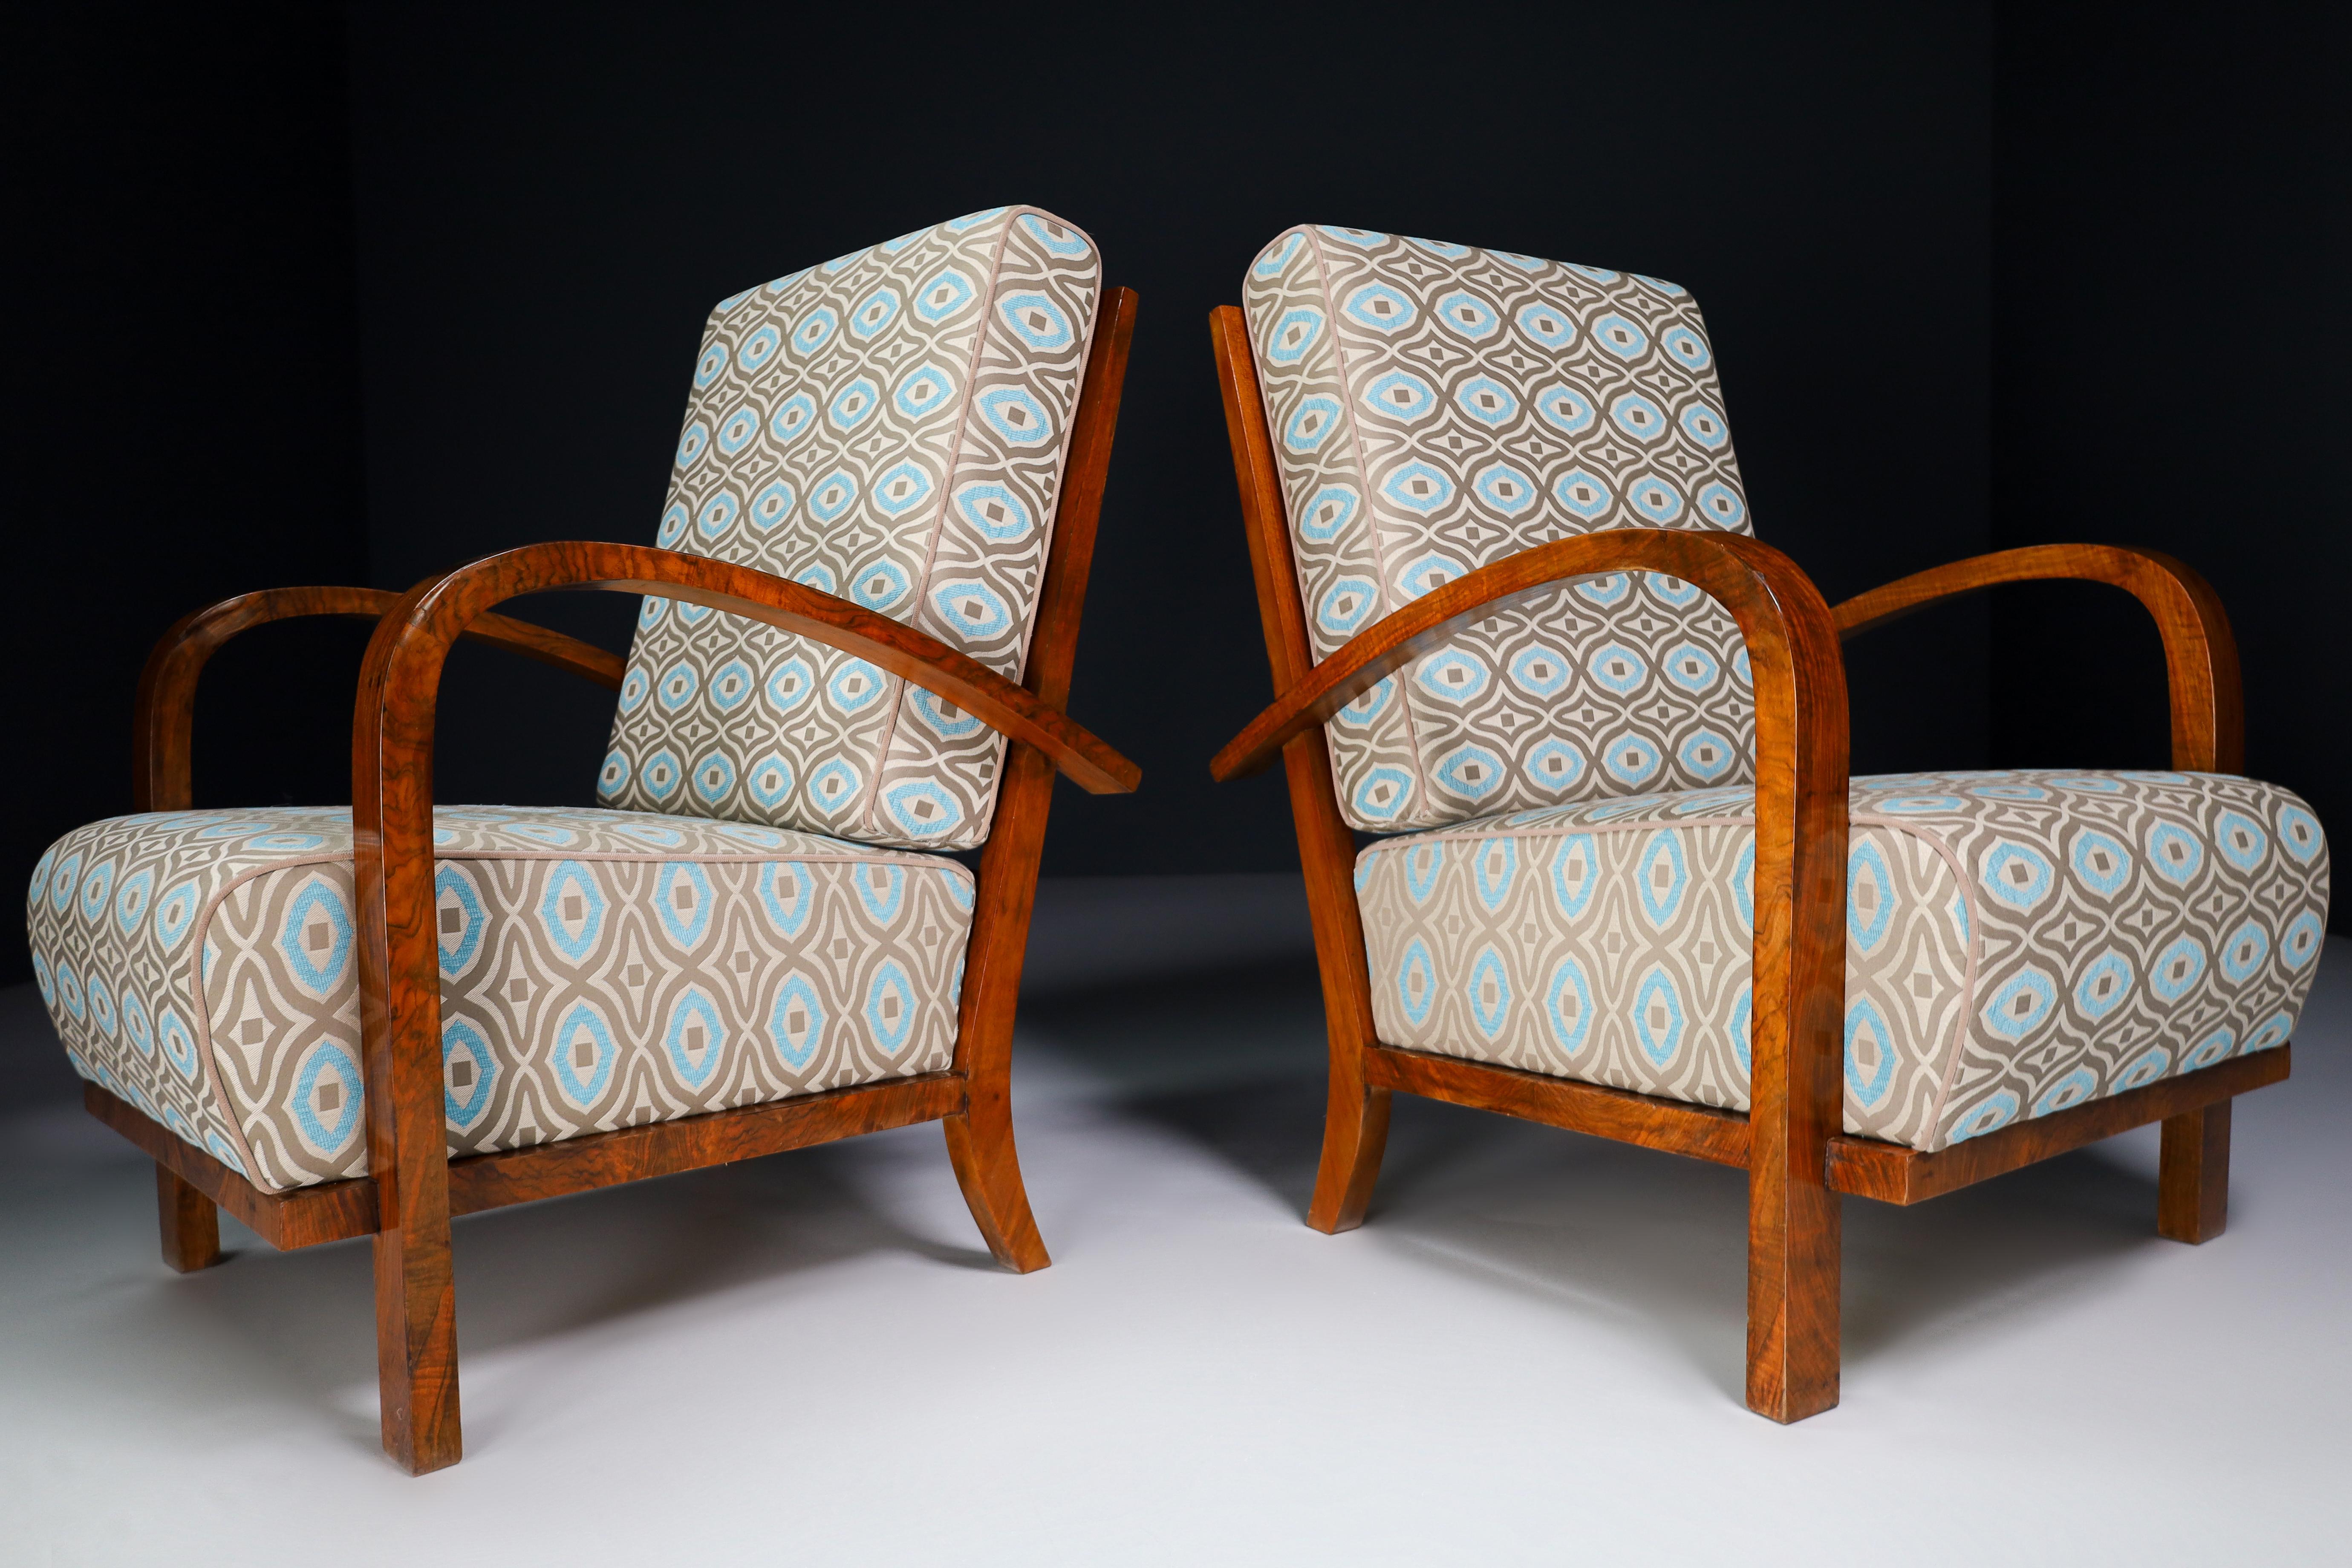 Pair of two Art-Deco lounge / arm chairs, walnut bentwood and re-upholstered fabric, Praque 1930s. These armchairs would make an eye-catching addition to any interior such as living room, family room, screening room or even in the office. It also